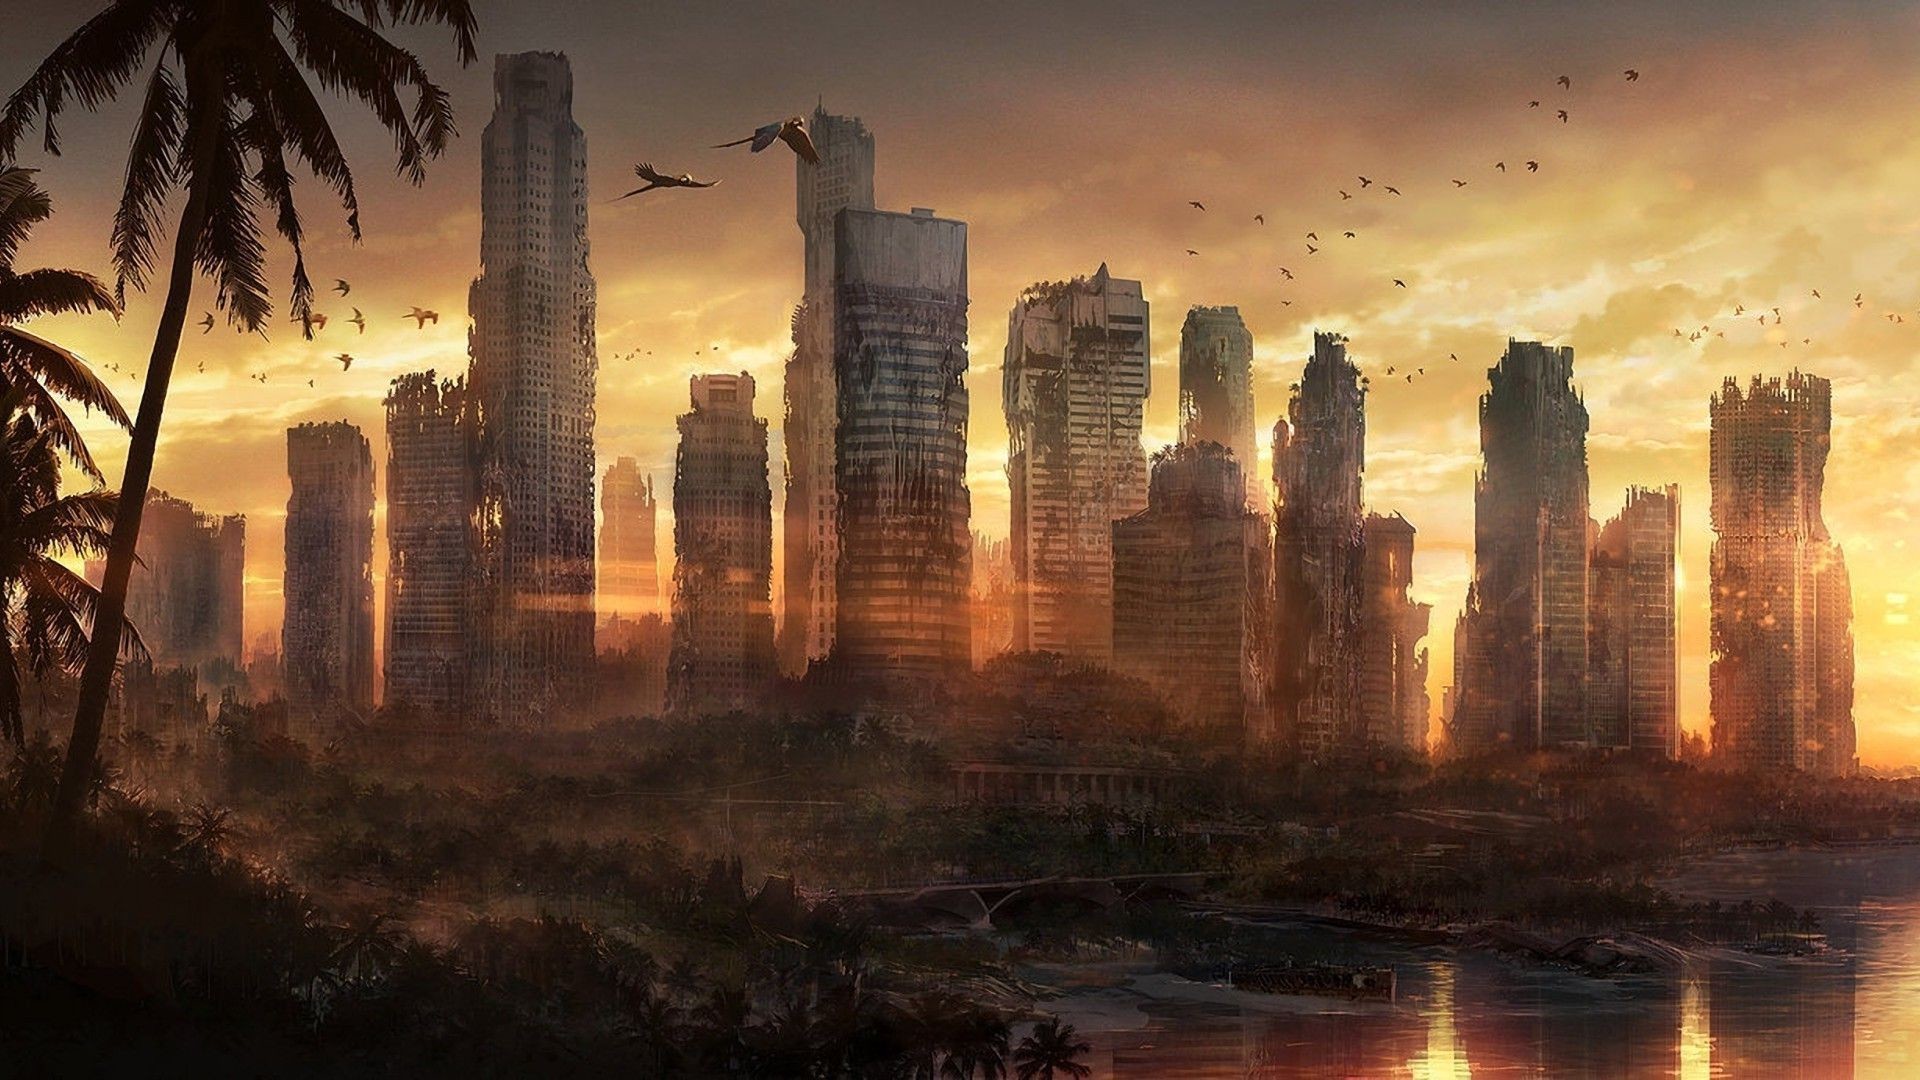 Post Apocalyptic Wallpaper Photo Wallpapers – Wallpaper Zone